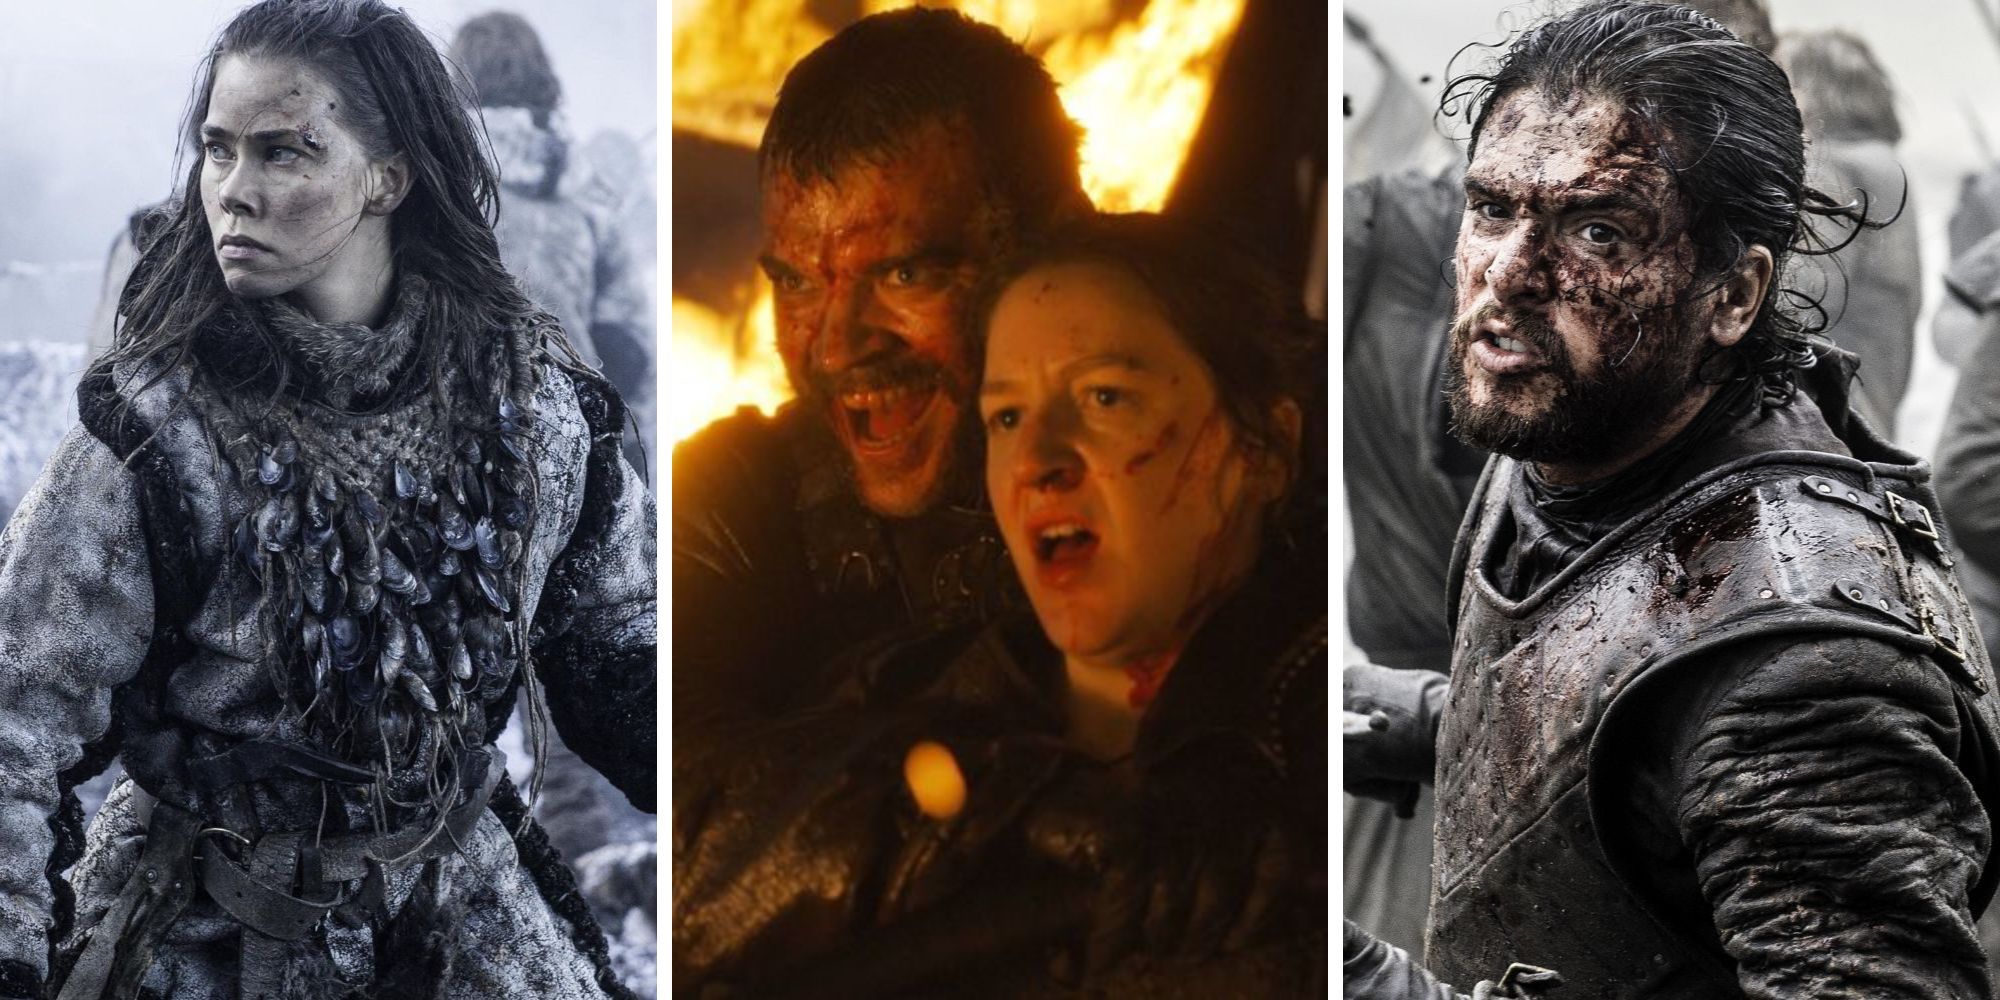 GOT Battles Featured Image featuring stills from Battle at Hardhome, Greyjoy naval battle, and Battle of the Bastards